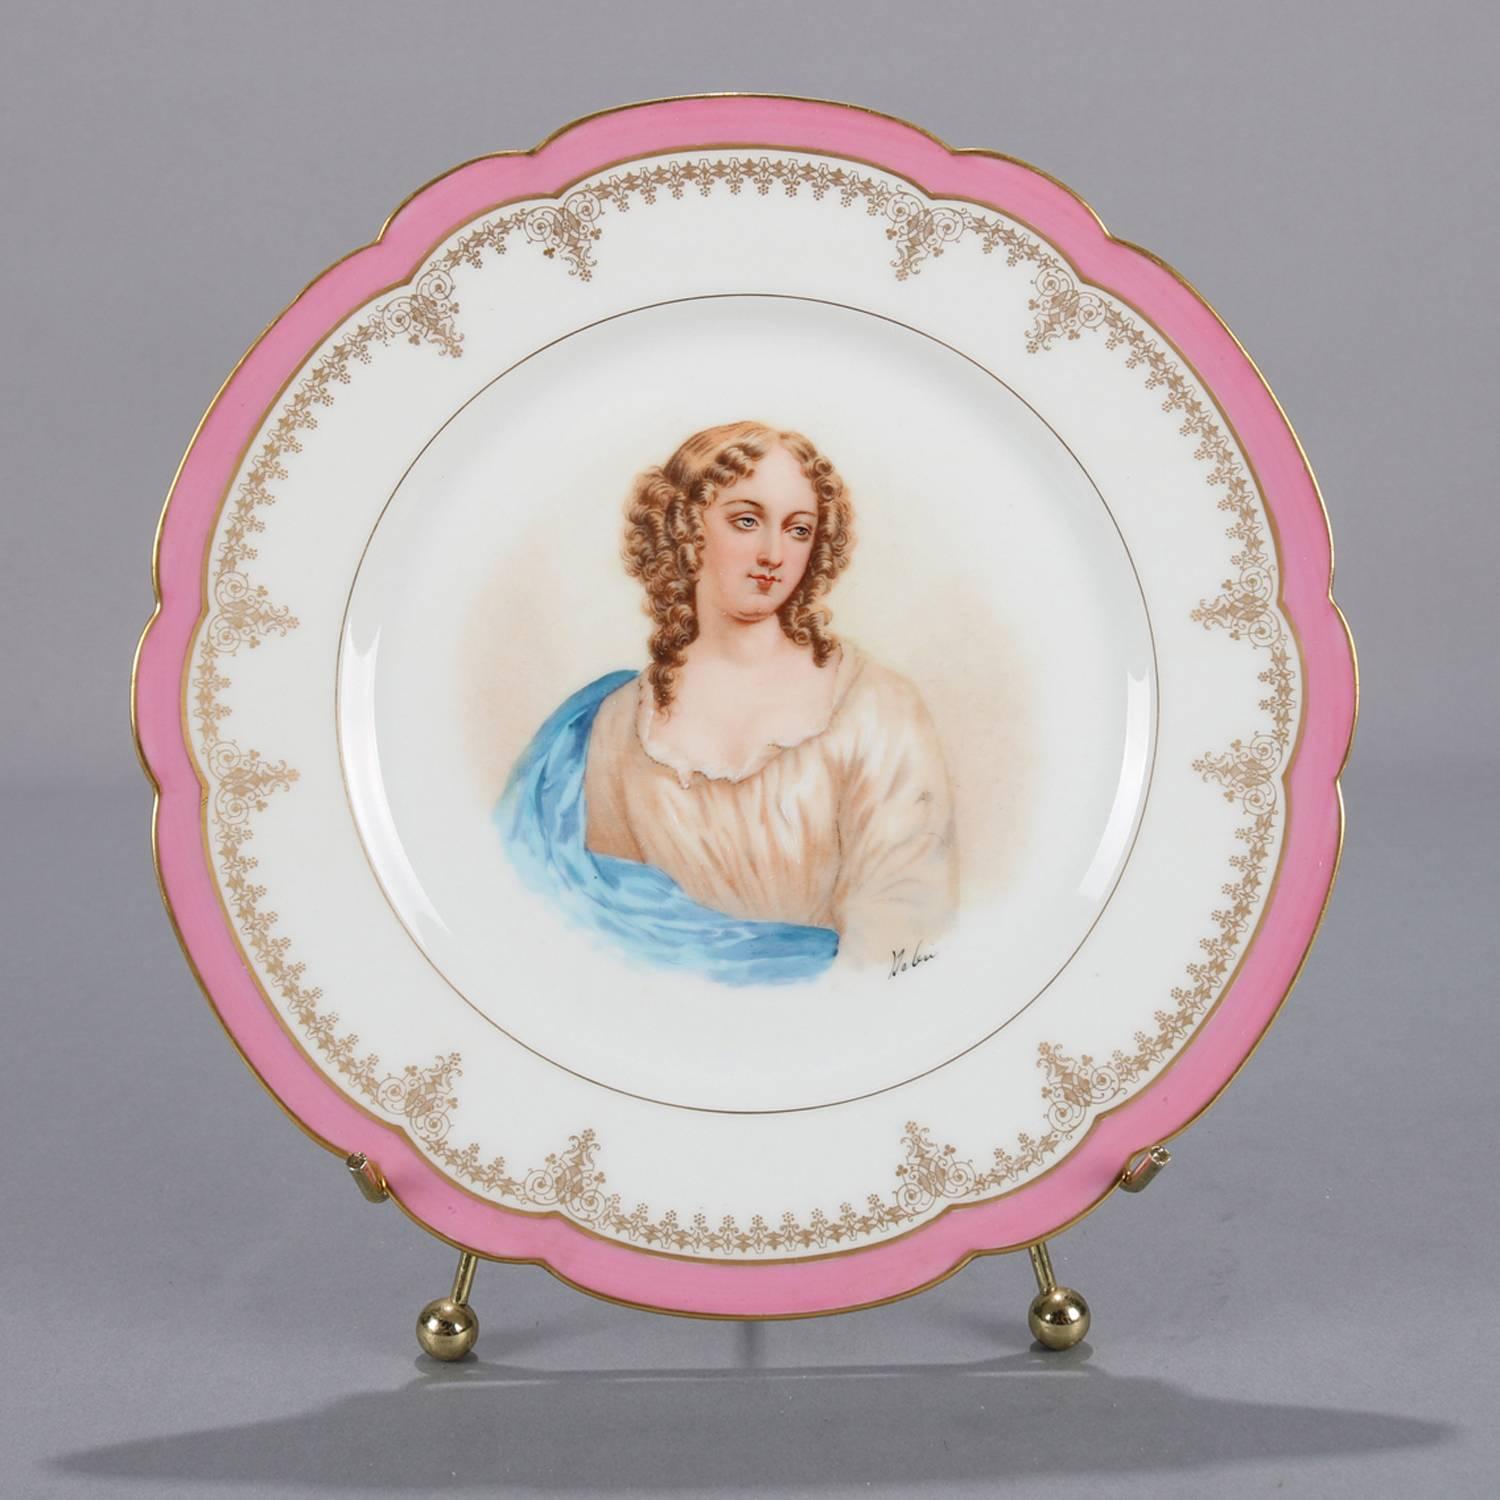 Antique French portrait plate by Sevres for Chateau de St Cloud features well with central artist signed portrait of Madame de Pavalliere by Debrie, rim with gilt scalloped edges and decorated with rose pink and gilt foliate motif, en verso stamped